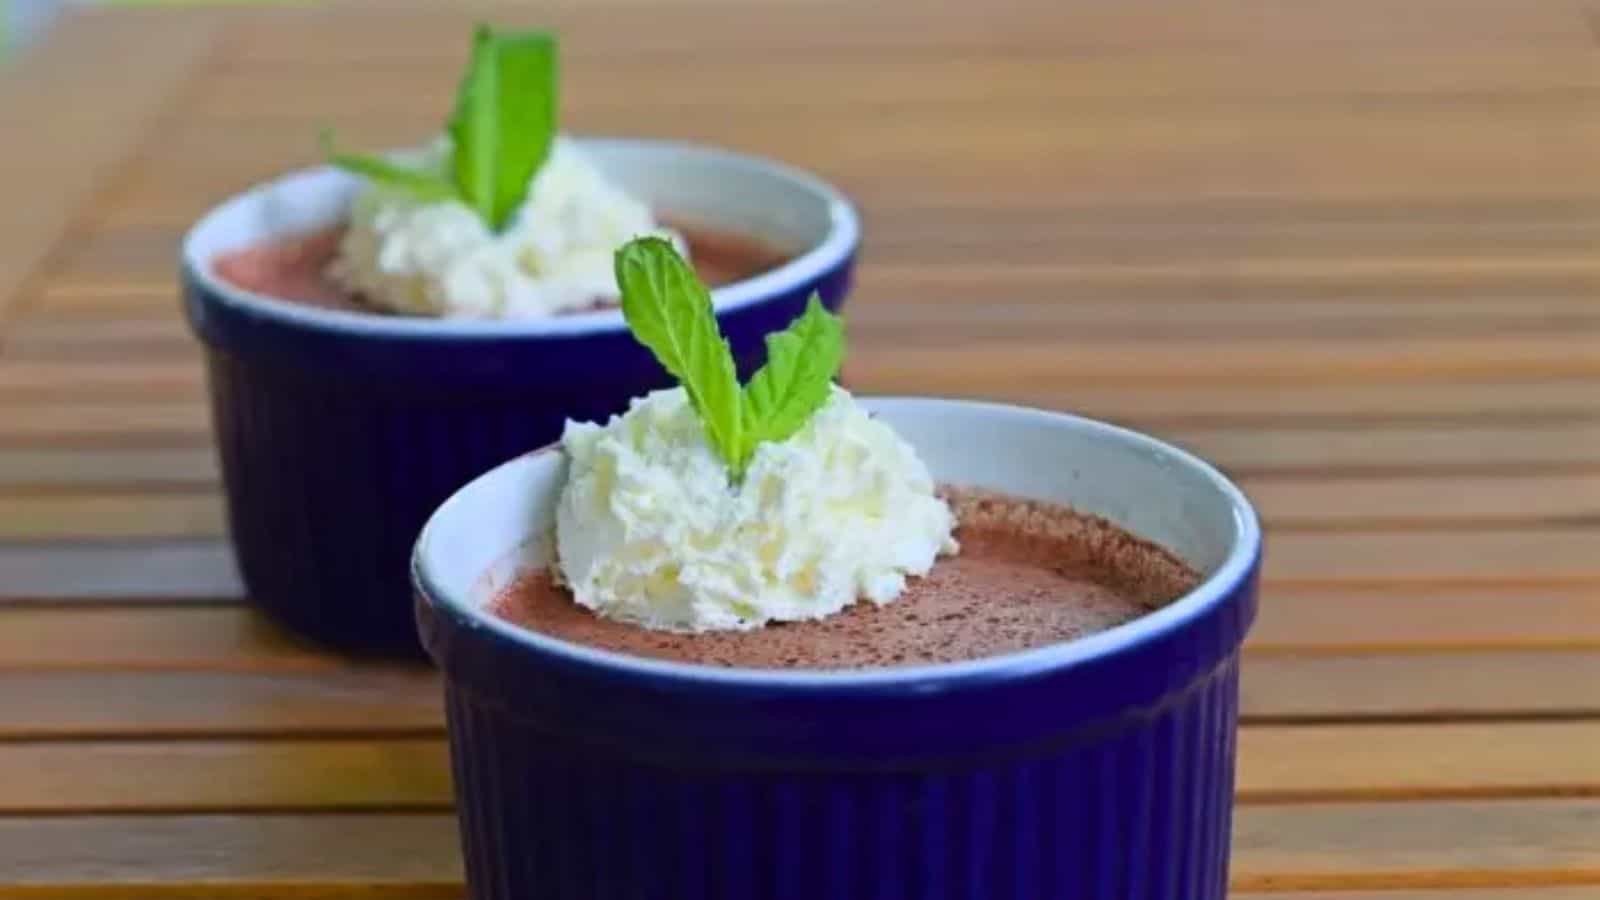 Image shows two ramekins with Cherry Custard in blue ramekins topped with whipped cream and mint leaves.